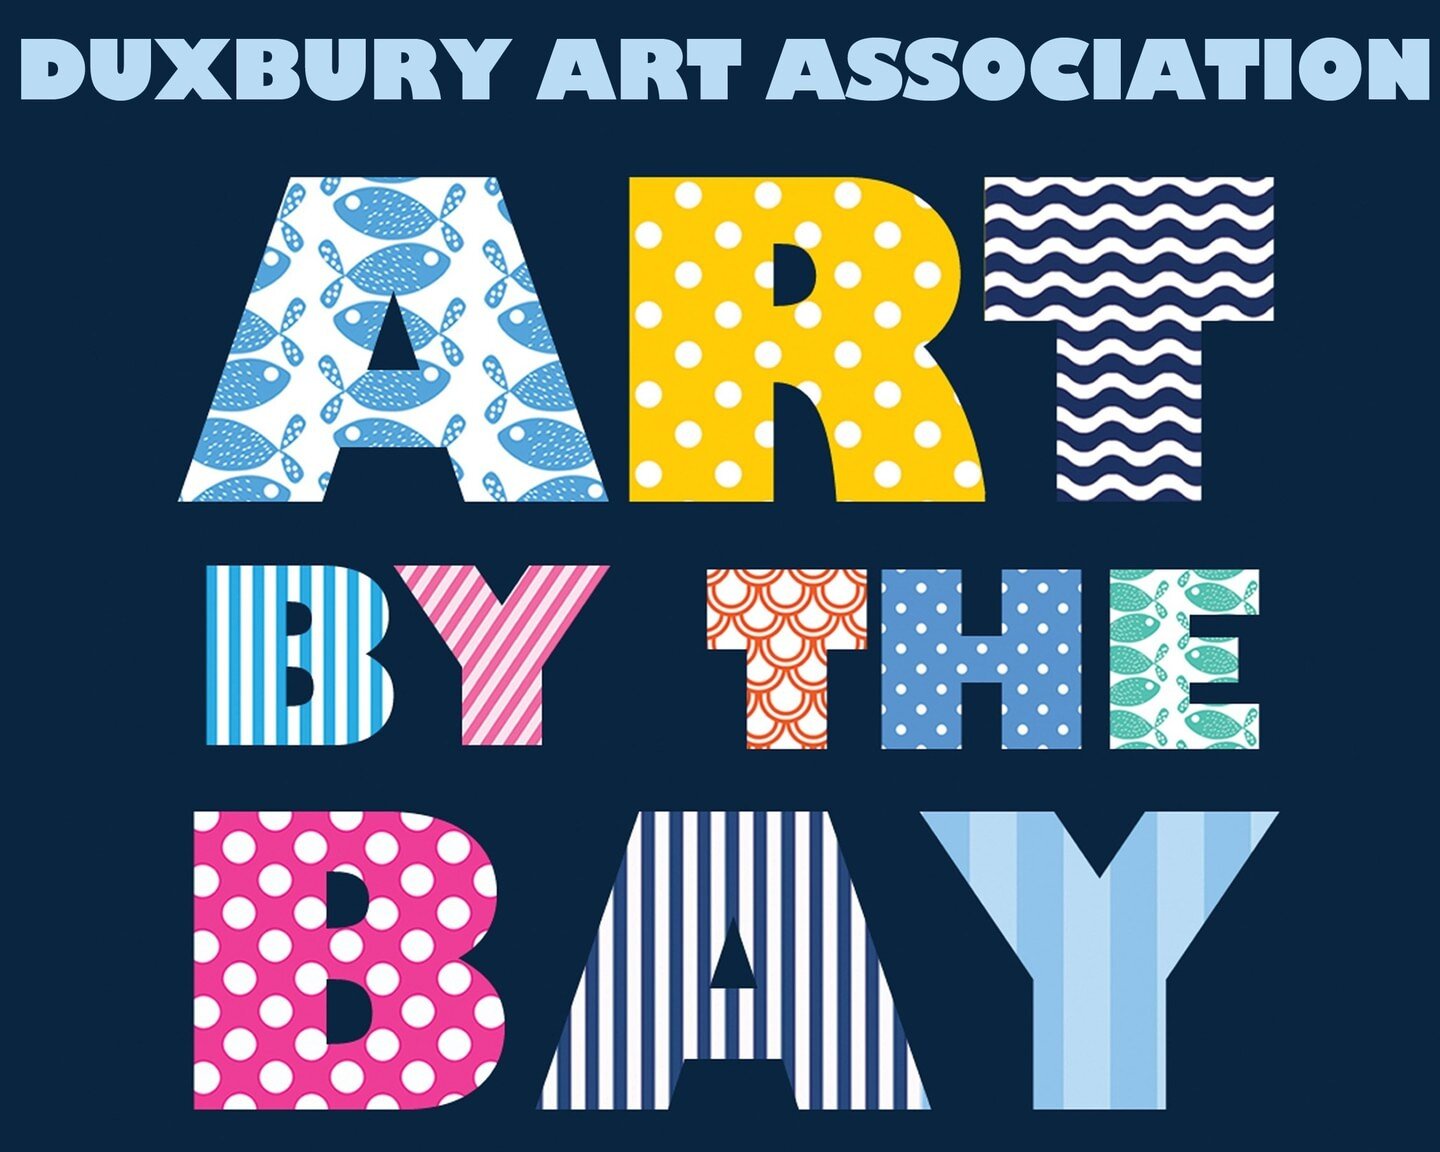 Register for Art by the Bay-Link in Bio